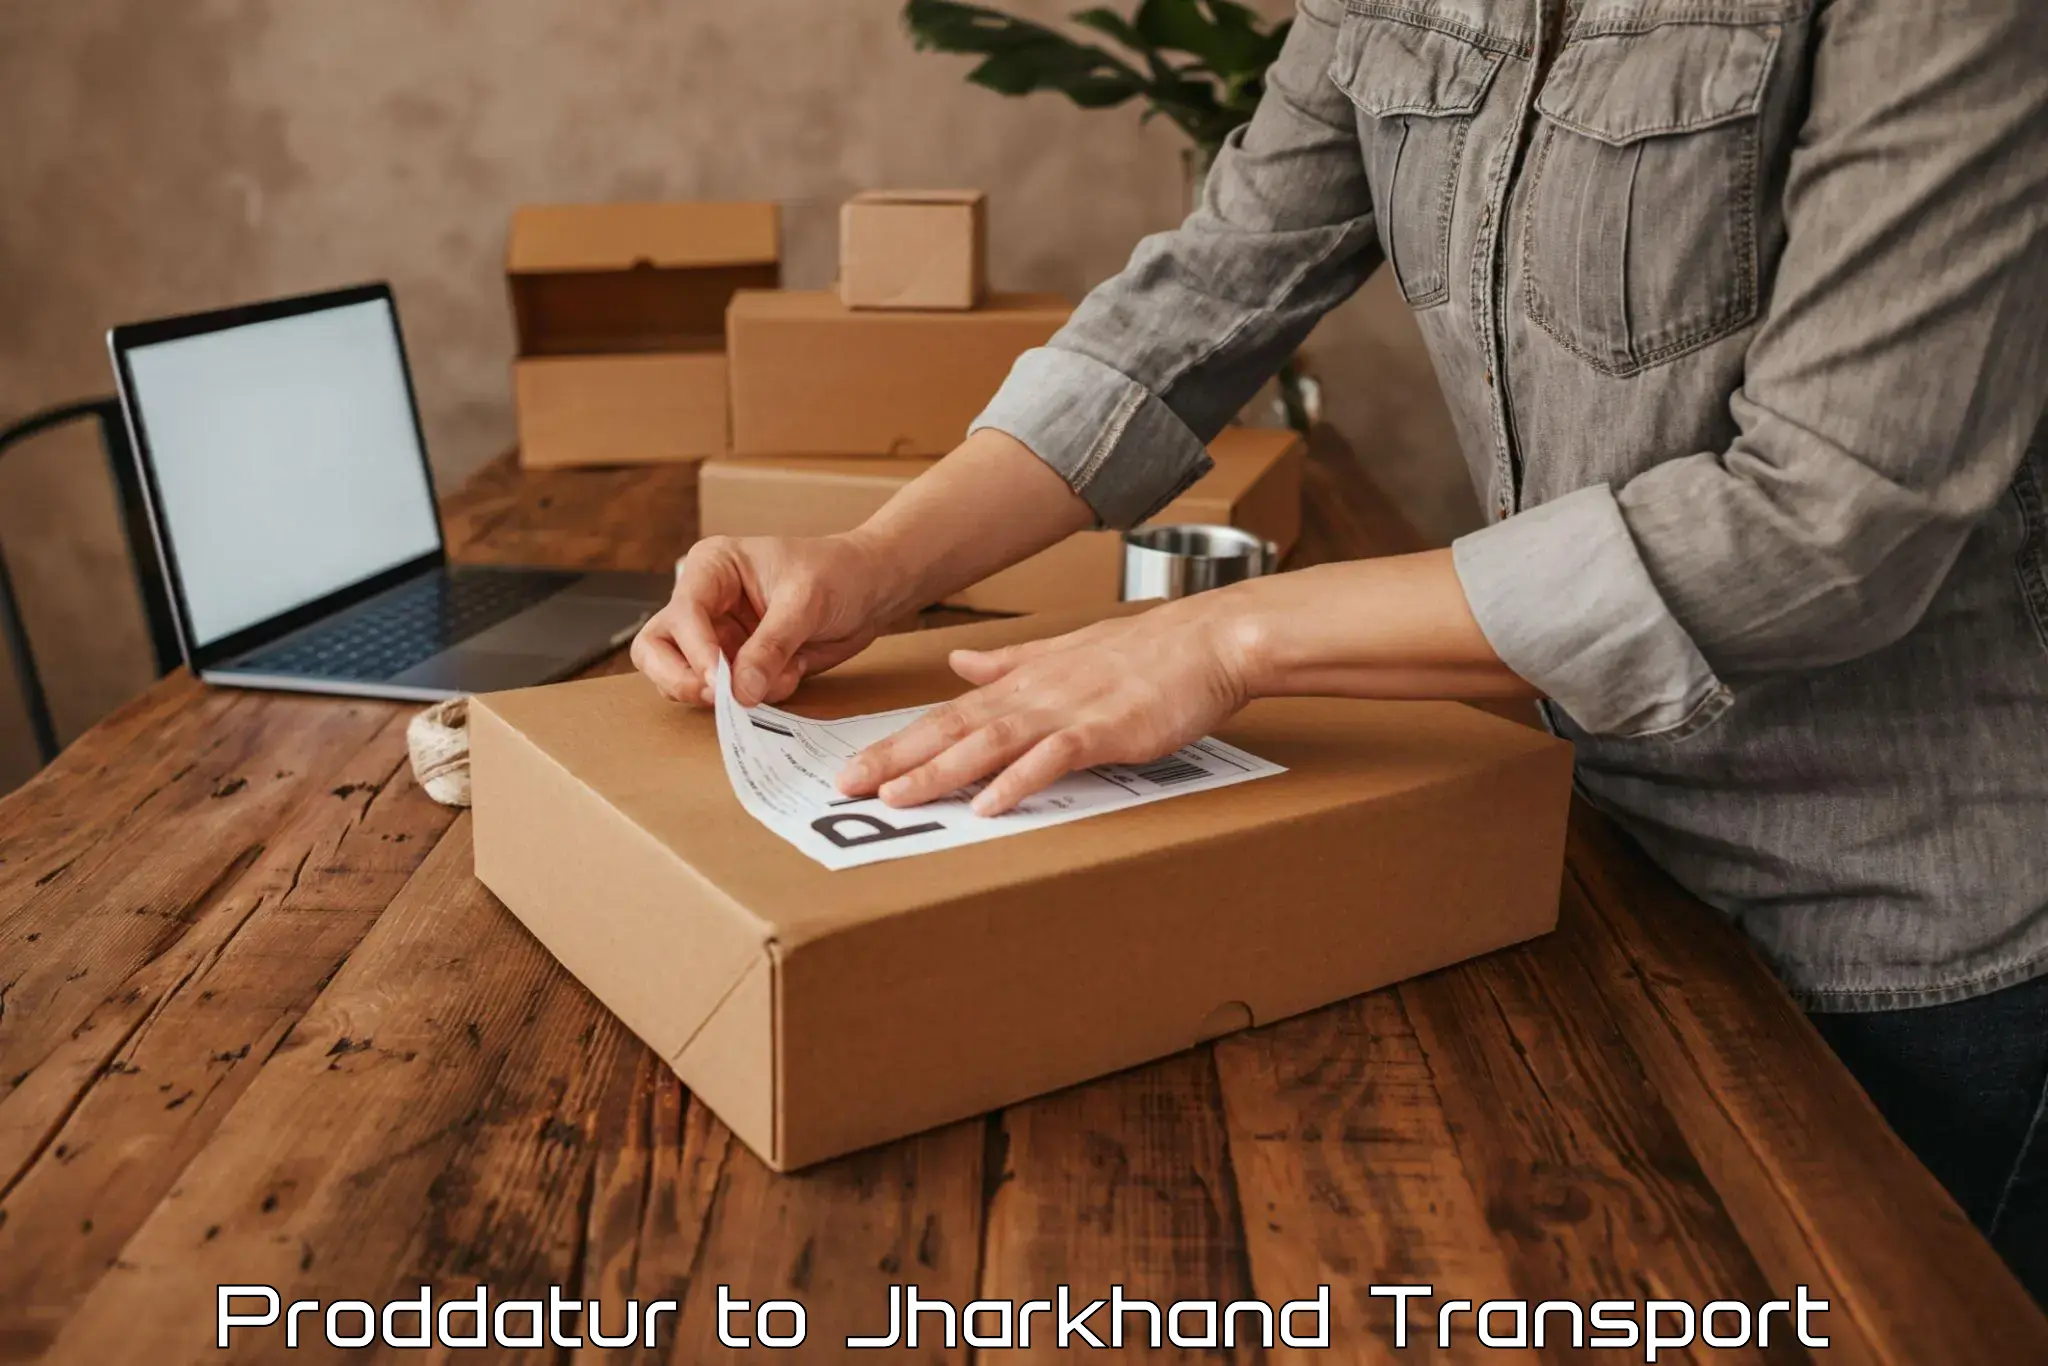 Truck transport companies in India Proddatur to Ramgarh